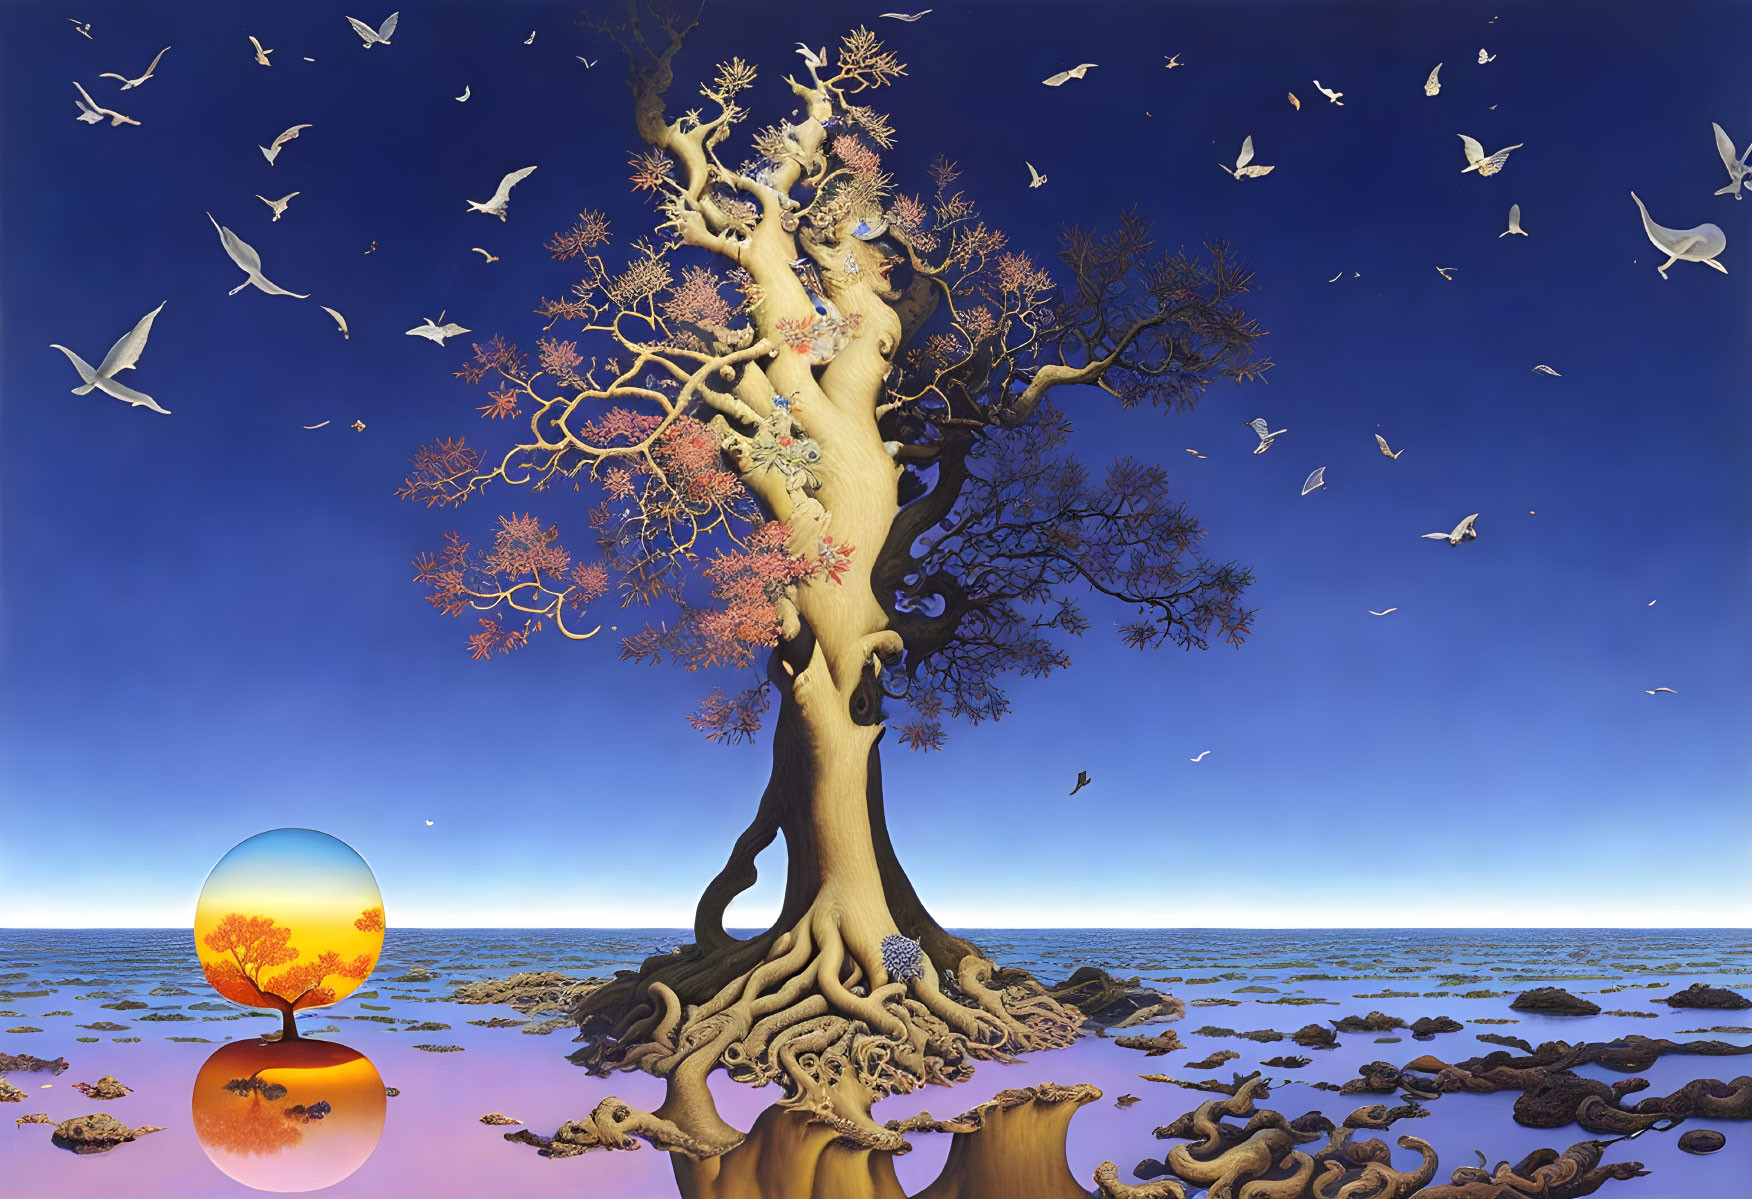 Surreal painting of tree with human-like branches and glowing egg at sunset